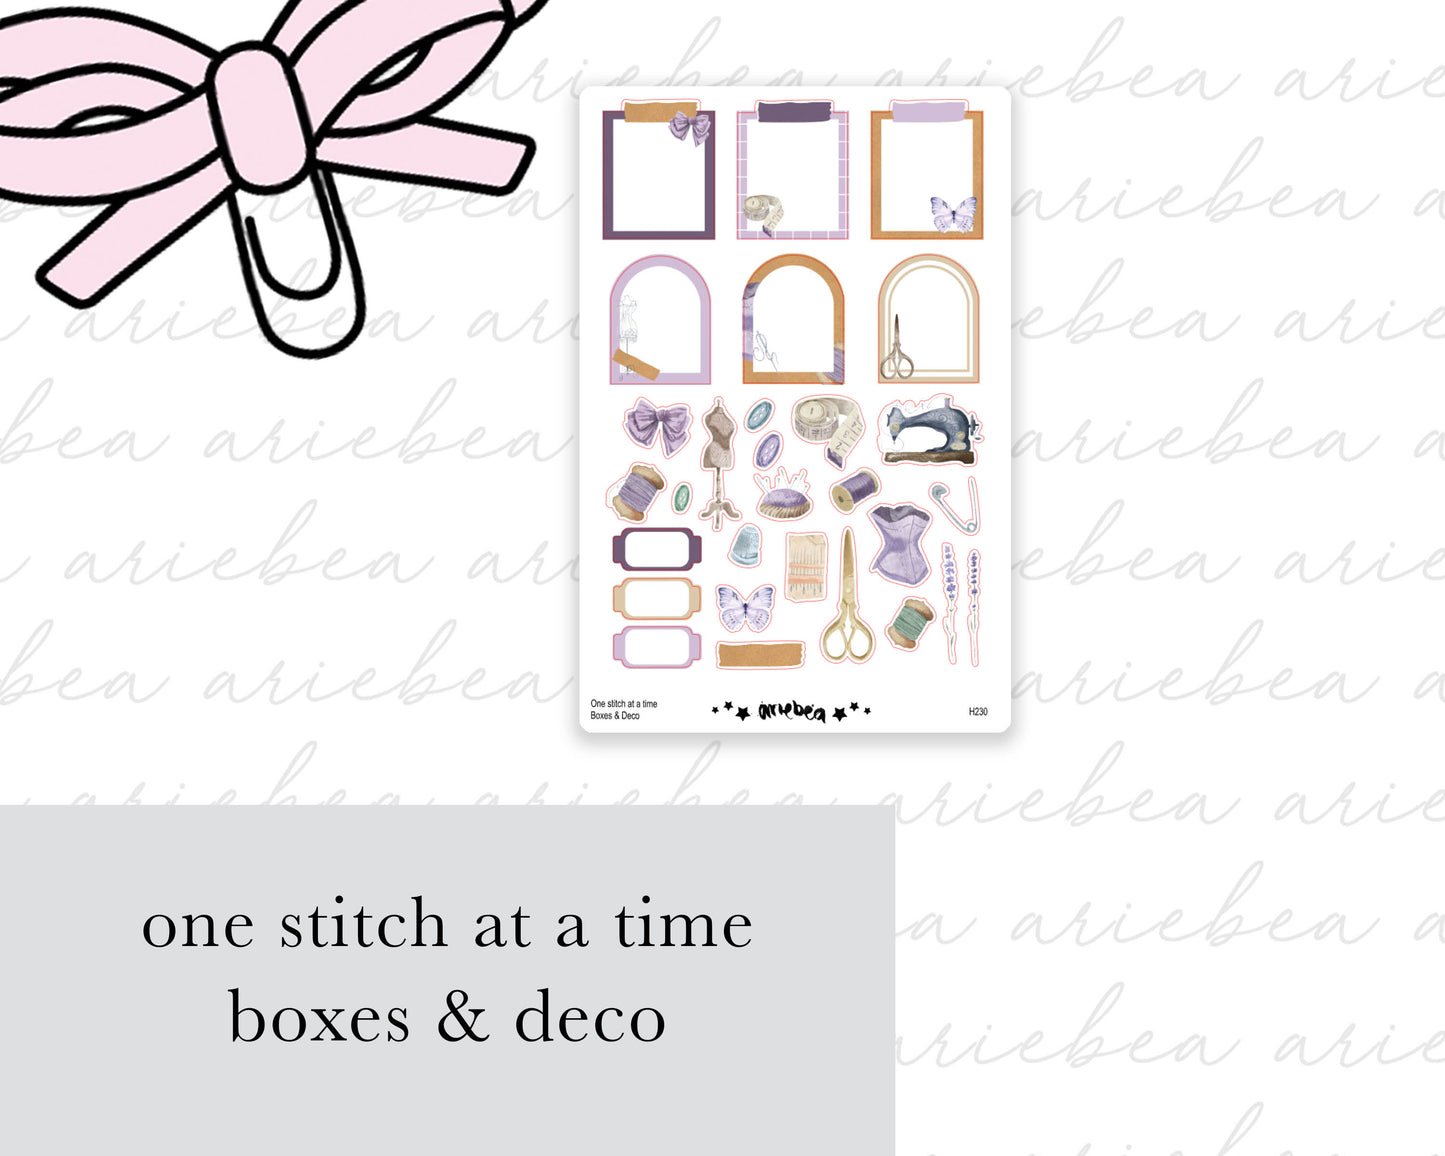 One Stitch at a Time Boxes & Deco